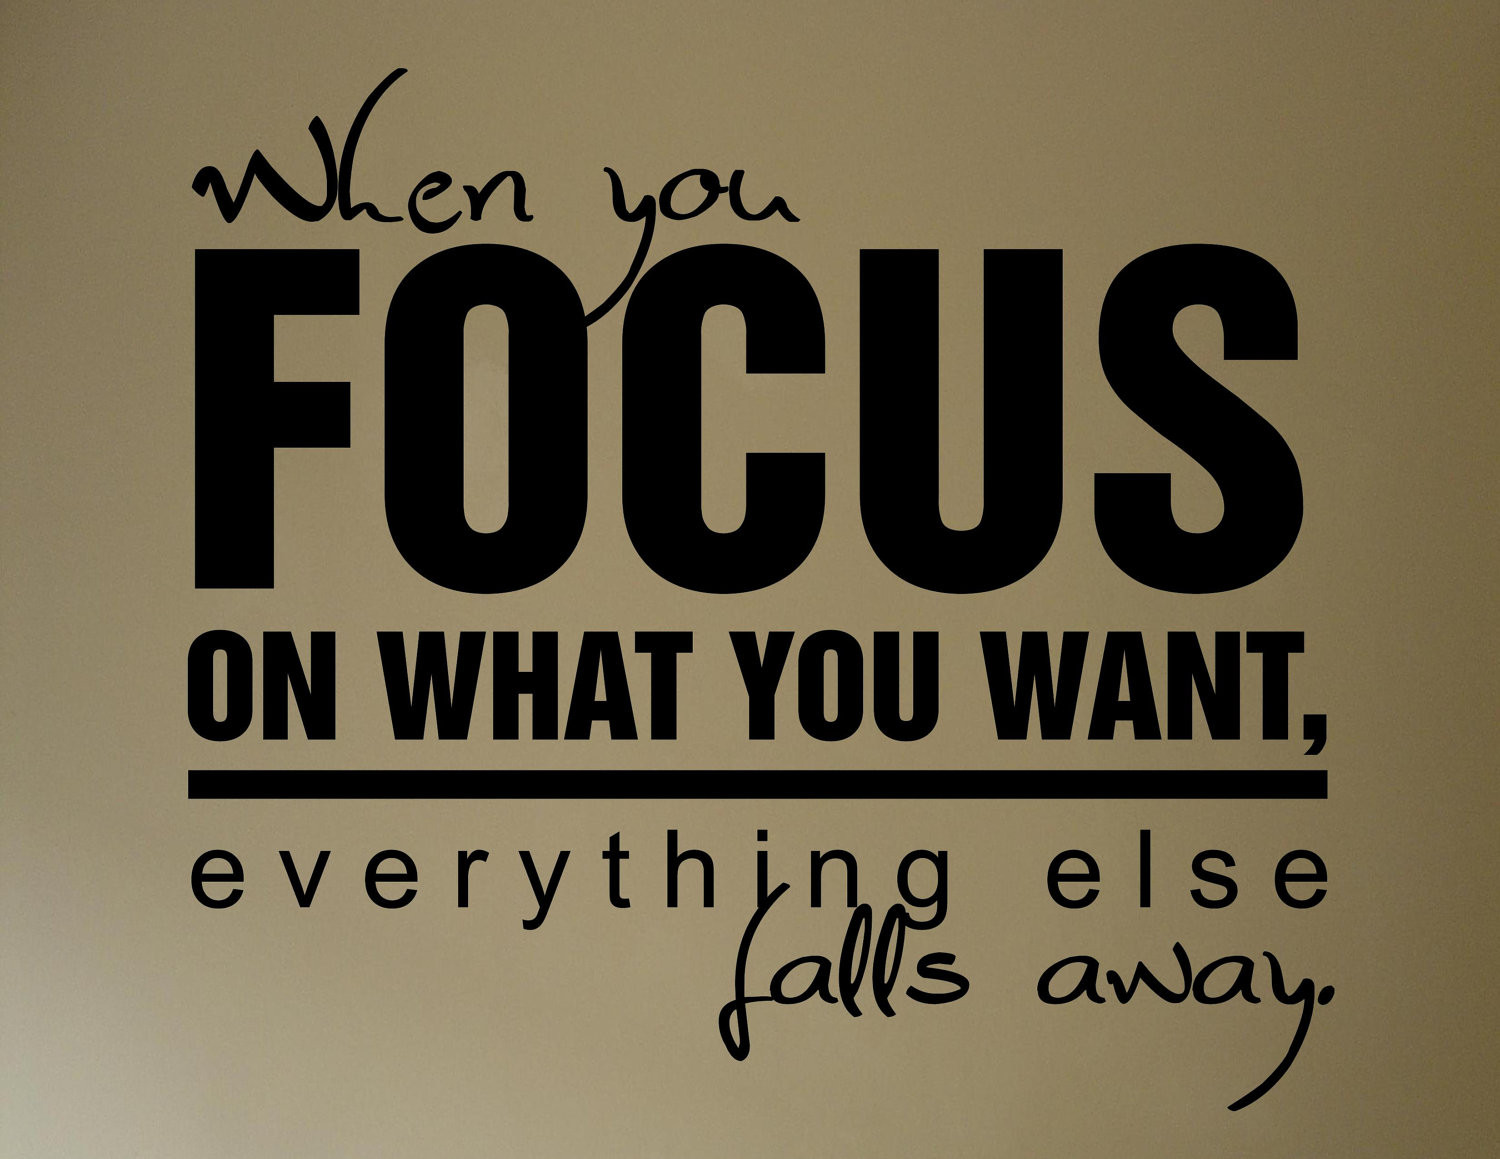 Focus On The Positives Quotes
 Focus The Positive Quotes QuotesGram